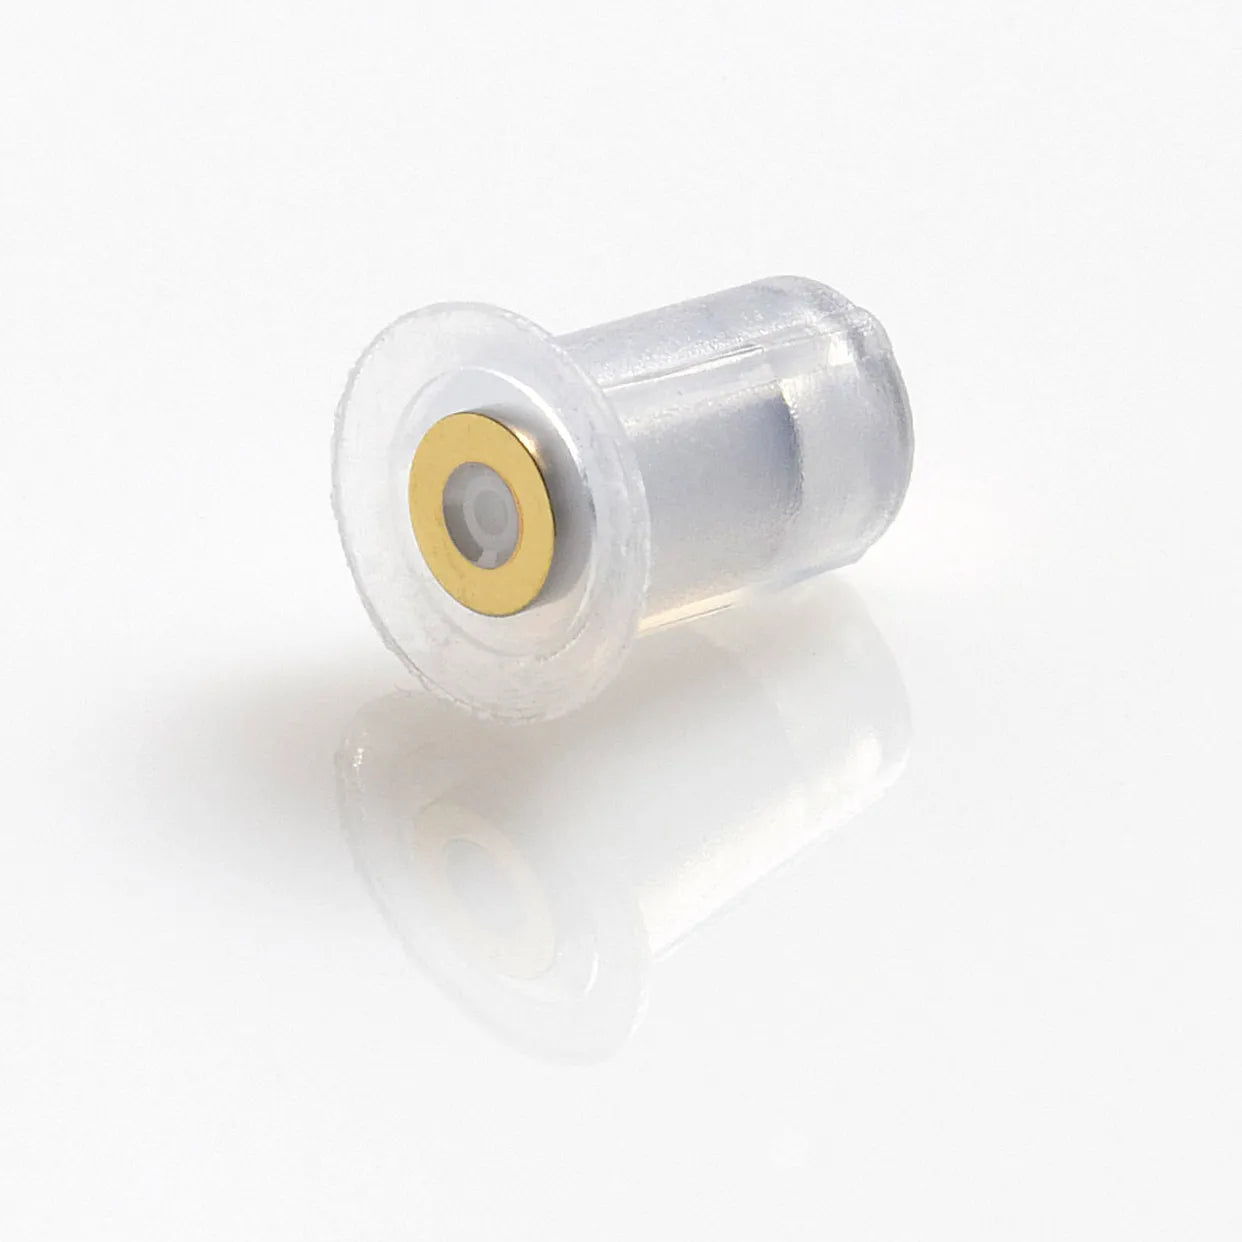 Active Inlet Valve Cartridge (400 bar), Comparable to Agilent # 5062-8562